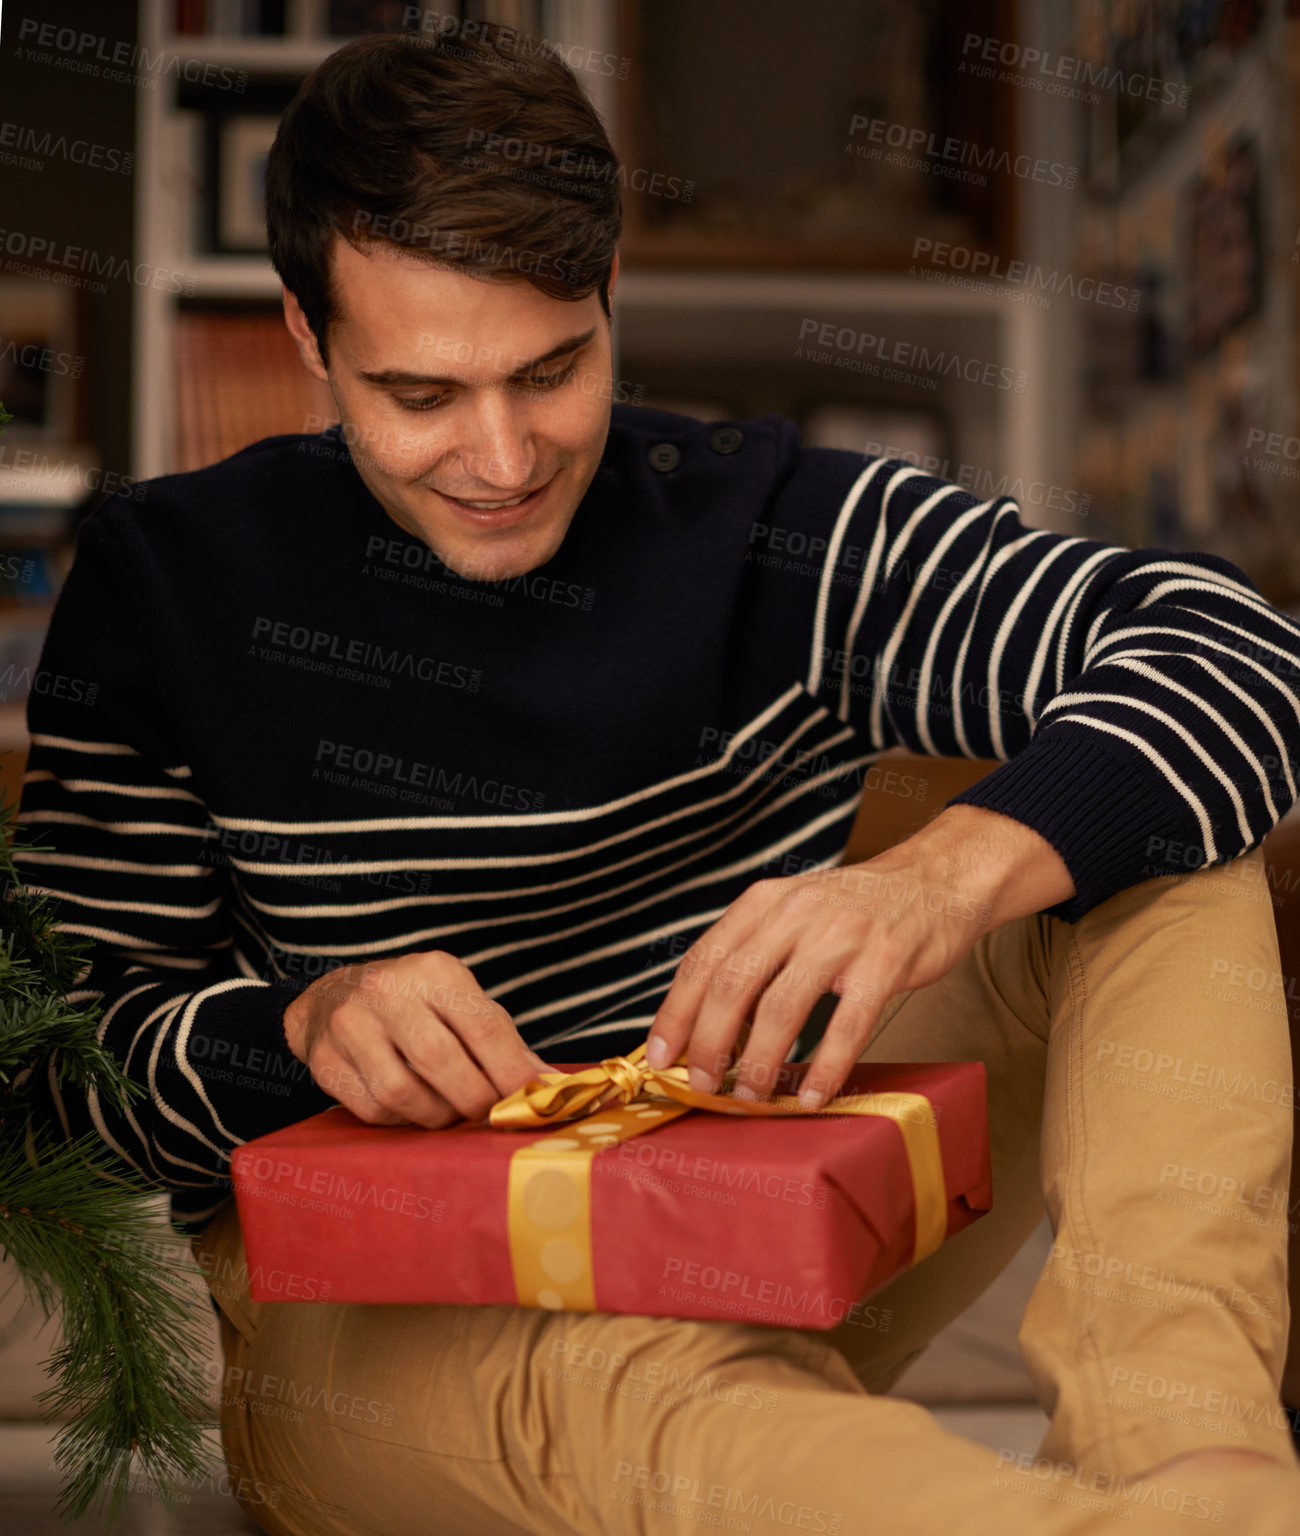 Buy stock photo Shot of a handsome young man getting ready for Christmas